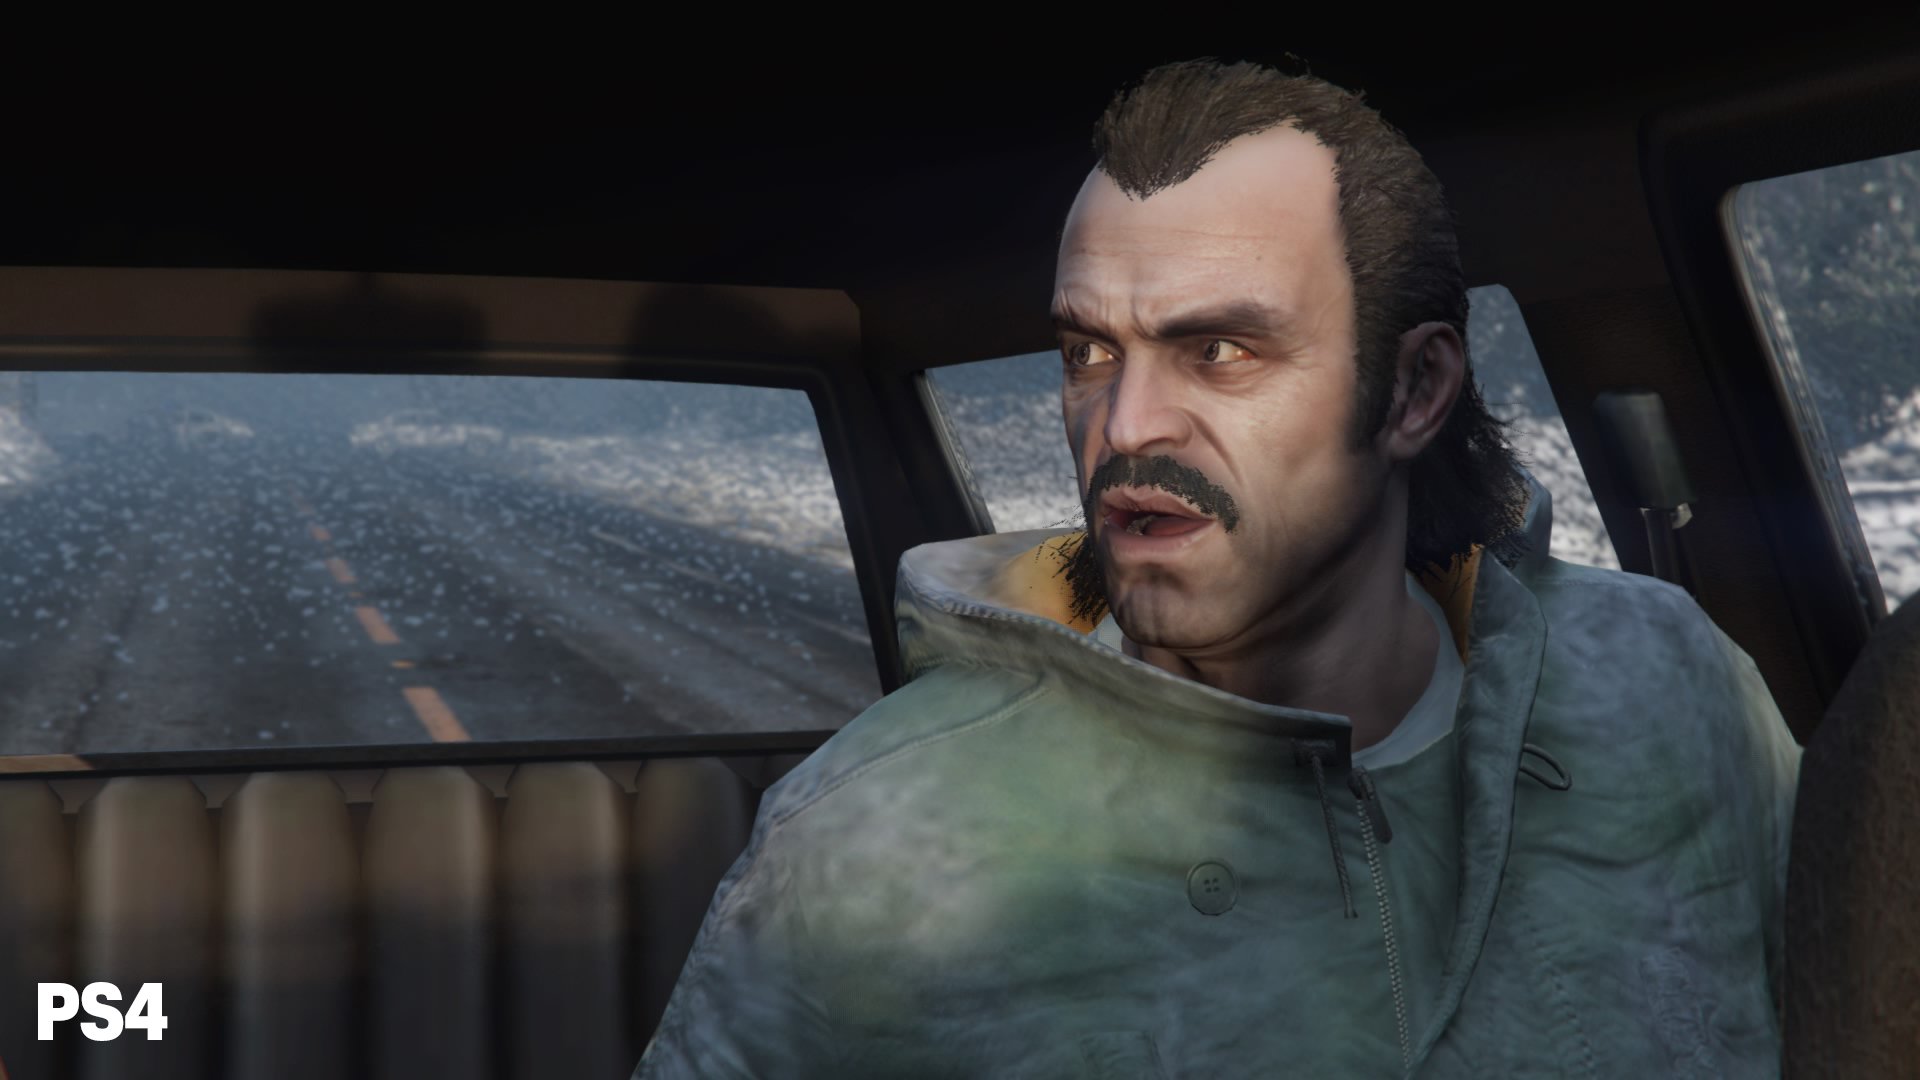 Here's how GTA Trilogy: Definitive Edition compares on PS4 vs Switch